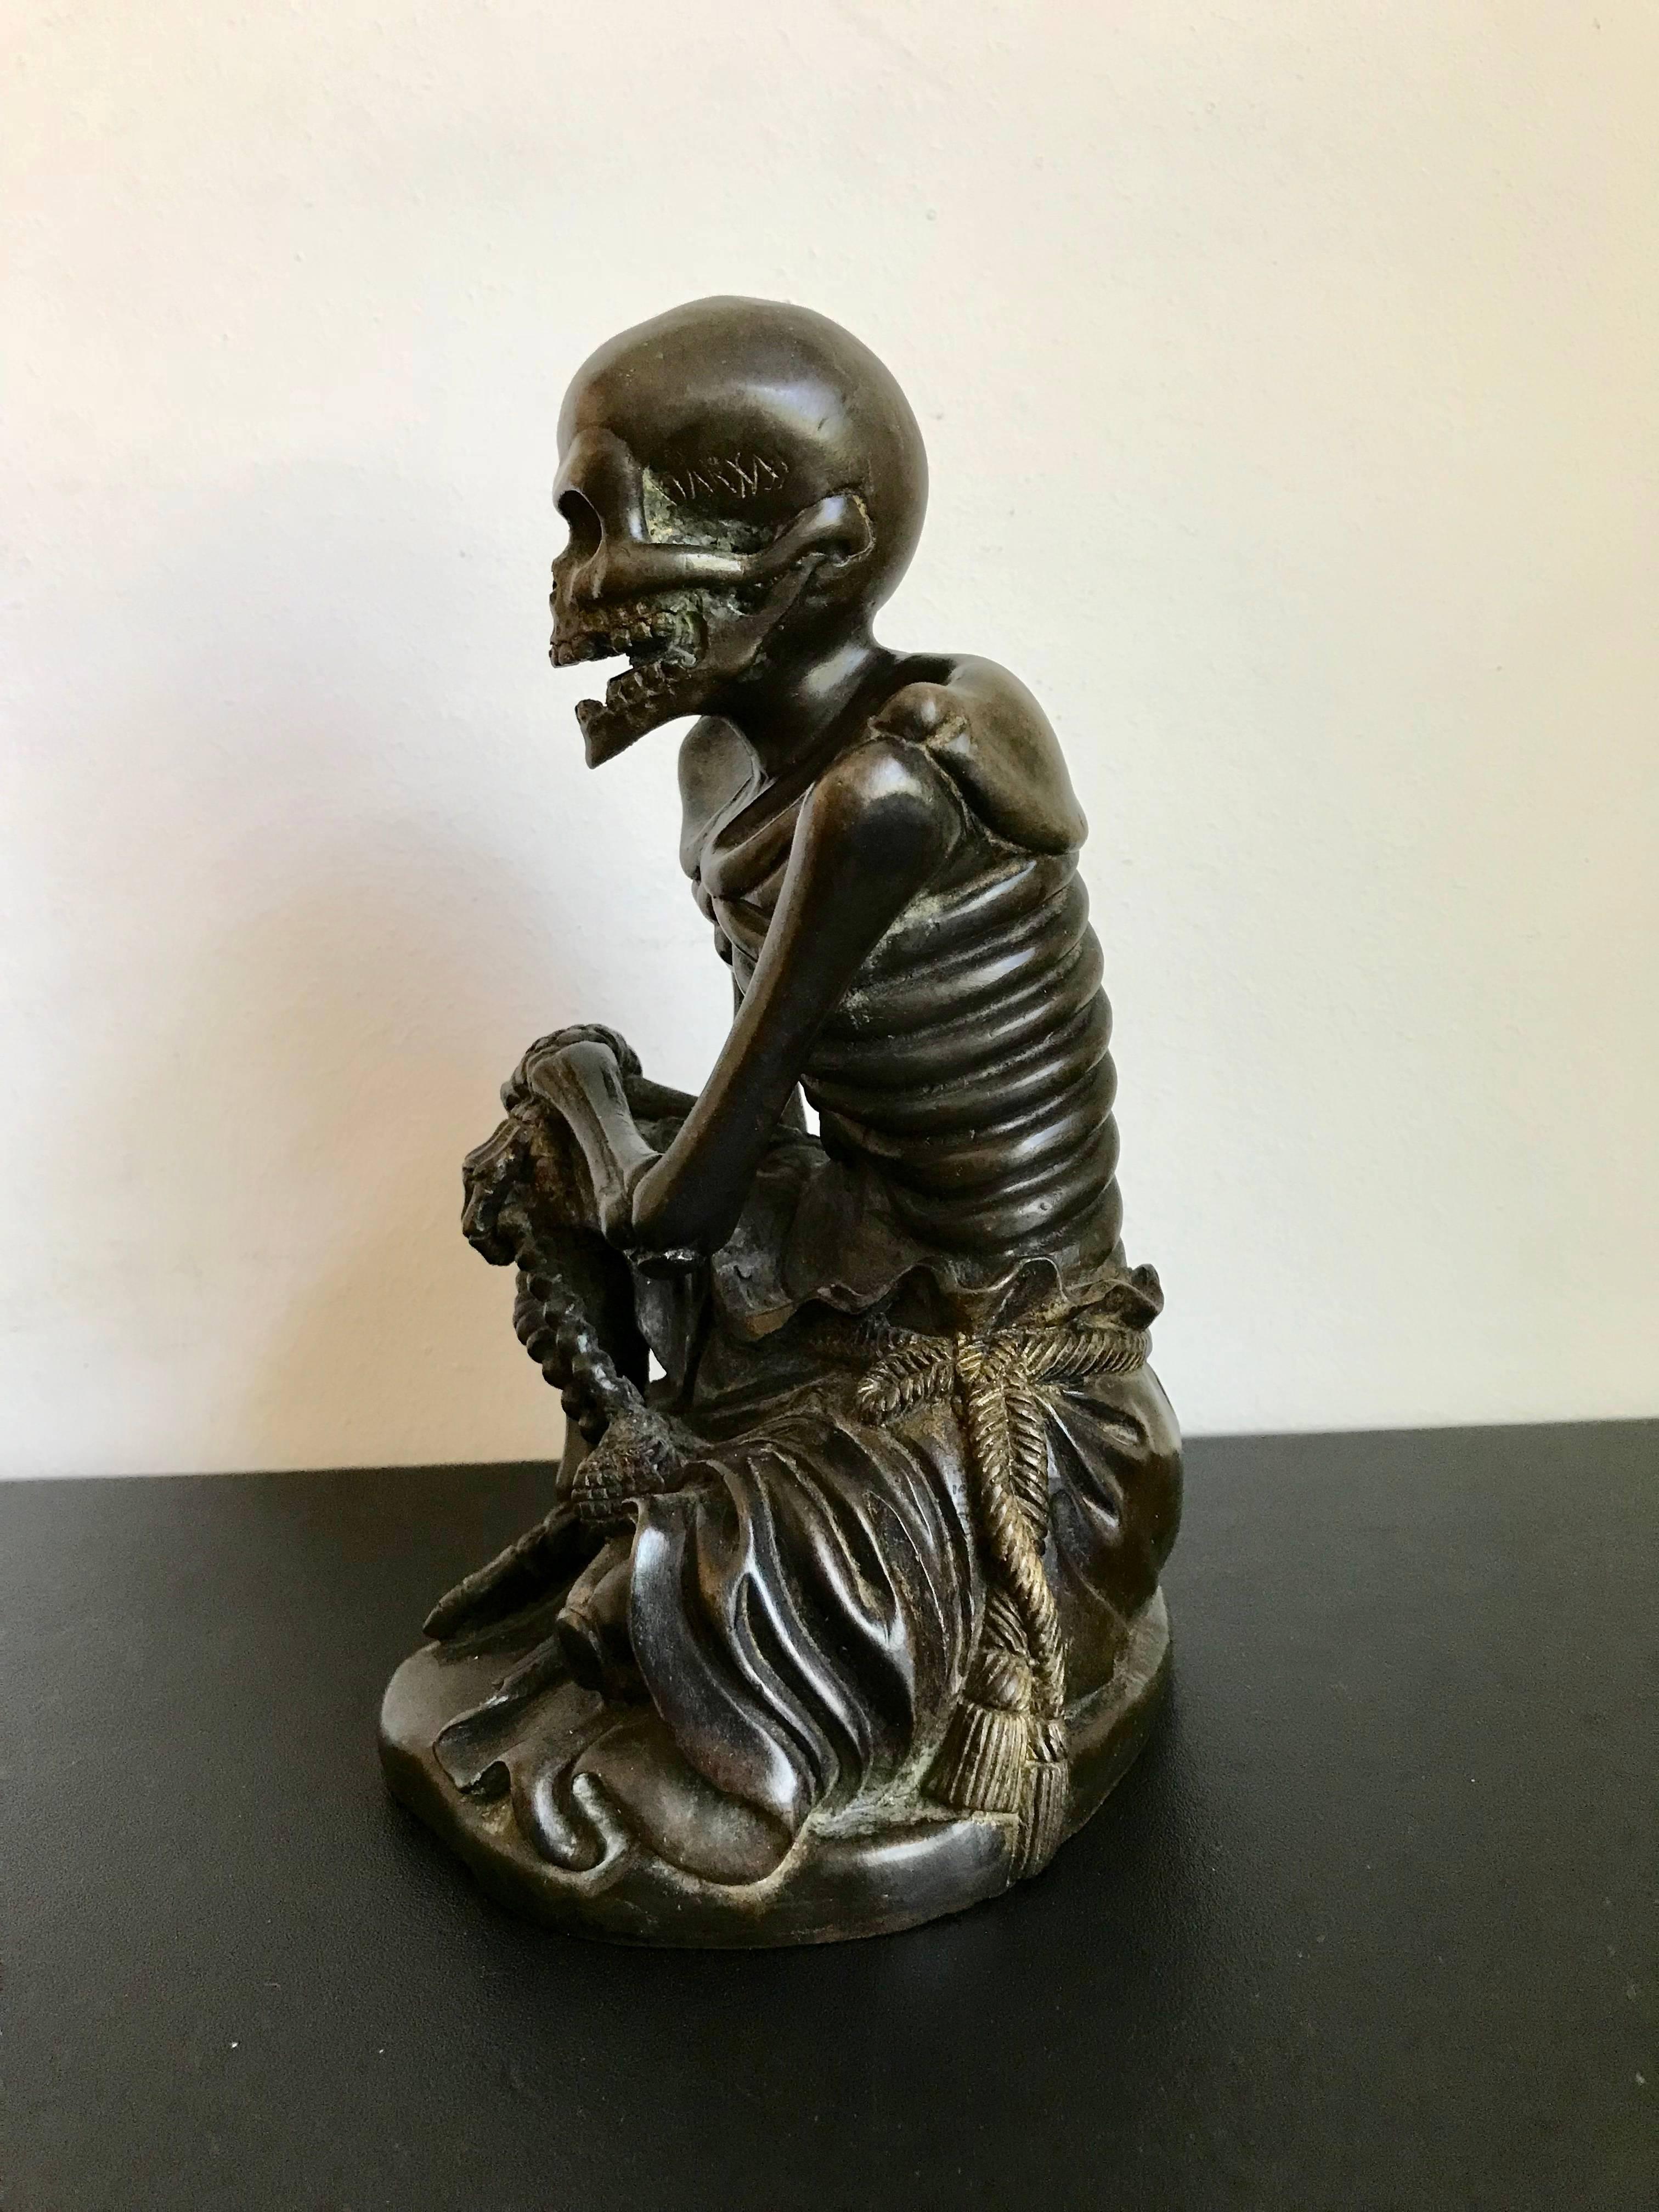 Beautifully cast and intriguing bronze skeleton of a monk shown seated with his robes and rope belt resting around his waist. Traces of gilding to the rope. Possible signature on the skull.